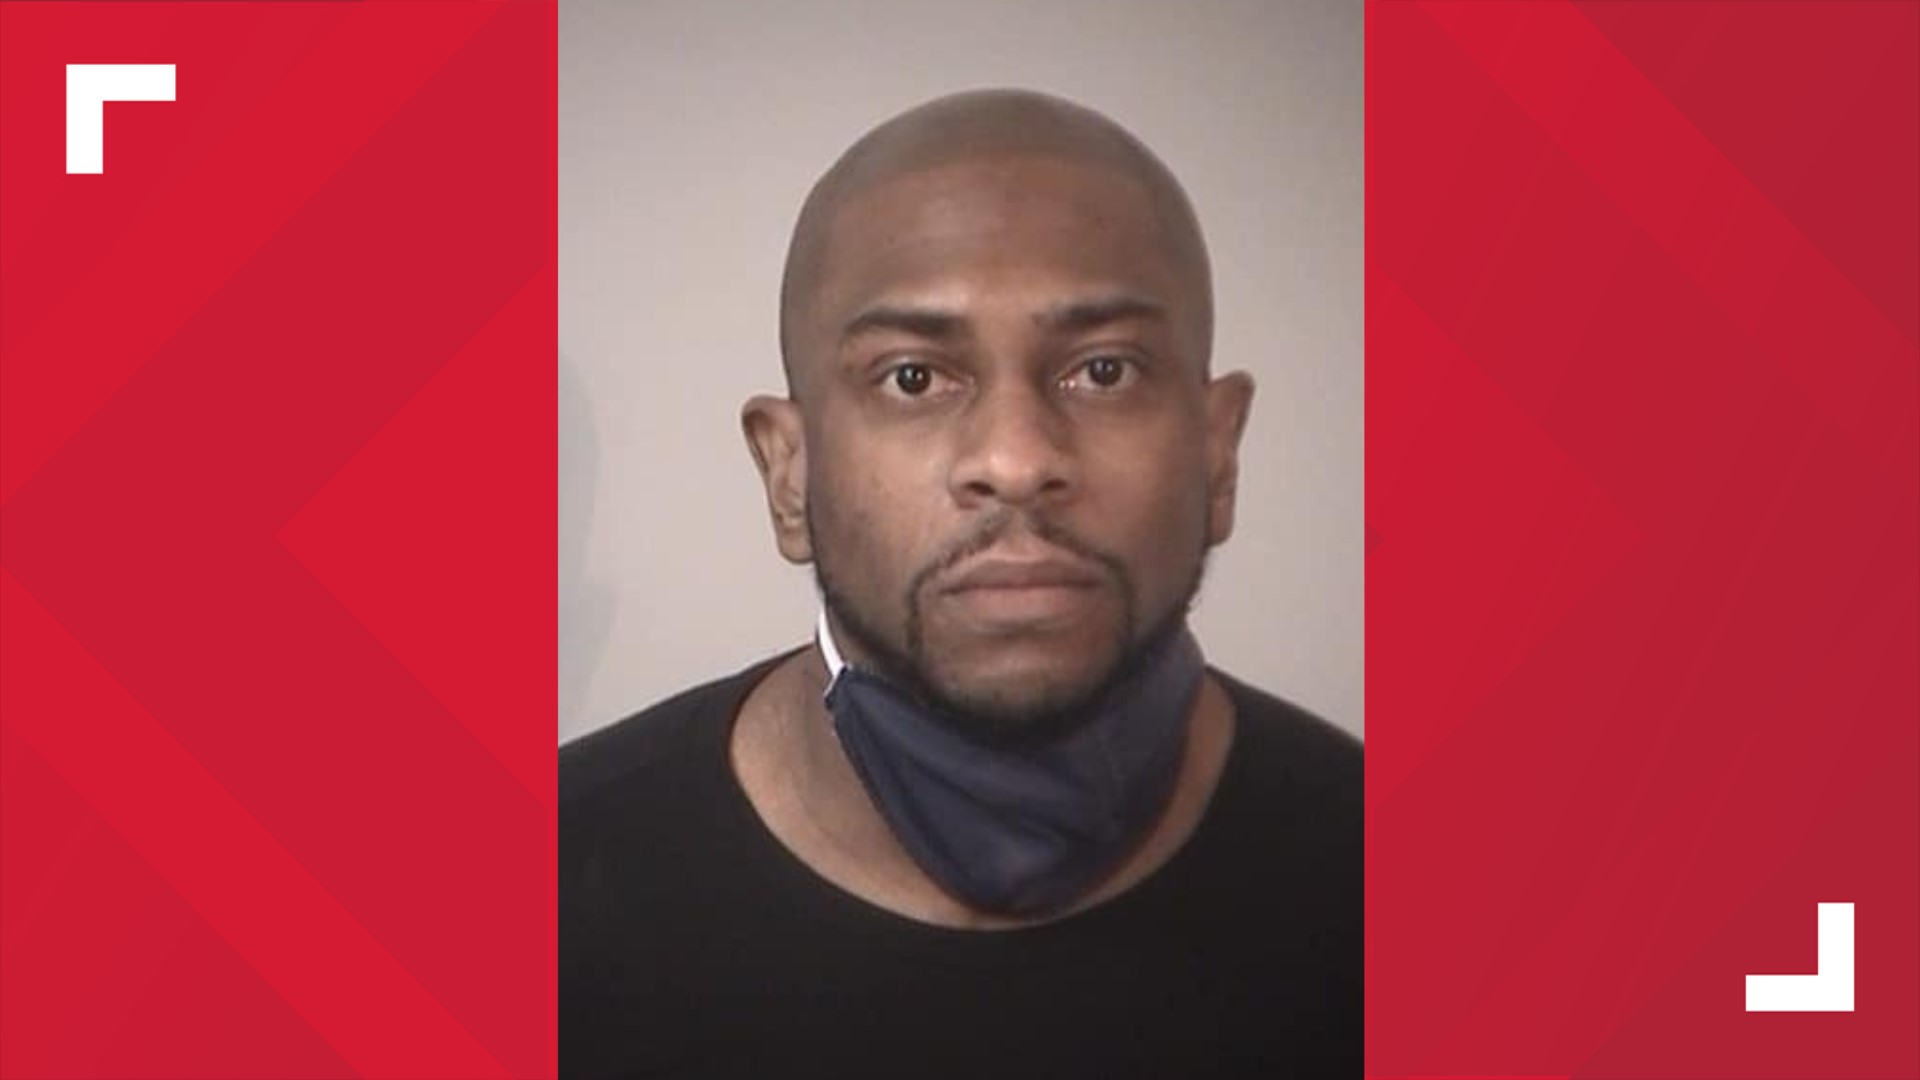 The alleged peeper, identified as 41-year-old Brian Anthony Joe of Woodbridge, was charged after falling through a ceiling in the women's locker room at the gym.